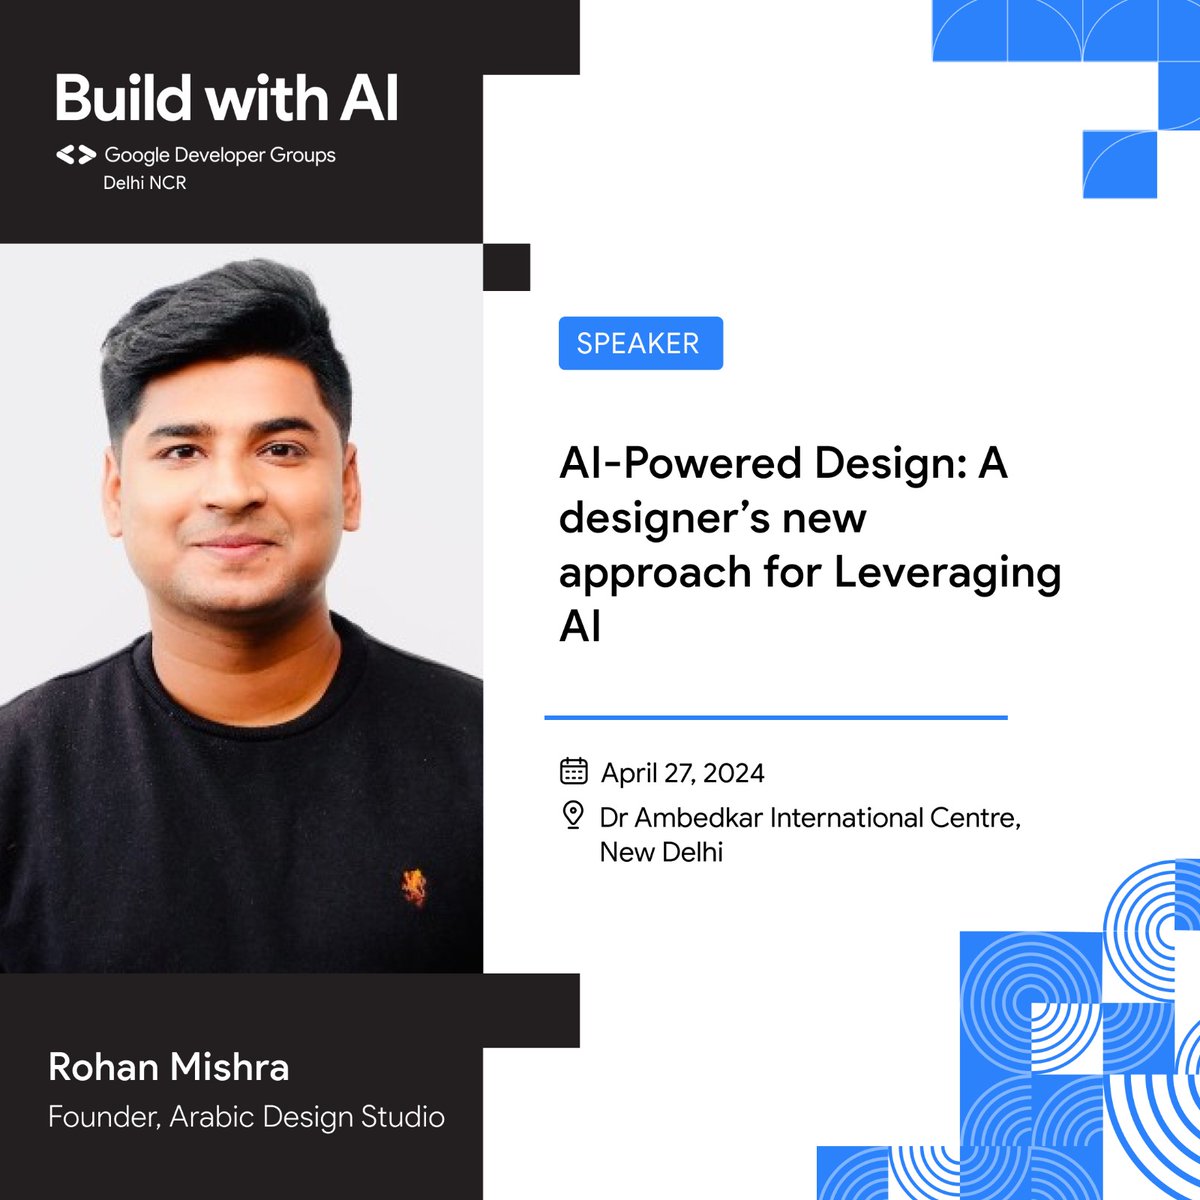 Hey designers 👋 Rohan Mishra is taking us on a journey through 'AI-Powered Design' and revealing how you can use AI as a co-pilot to supercharge your design workflows. We're talking AI that generates visuals, suggests fire color palettes, and even helps you explore totally